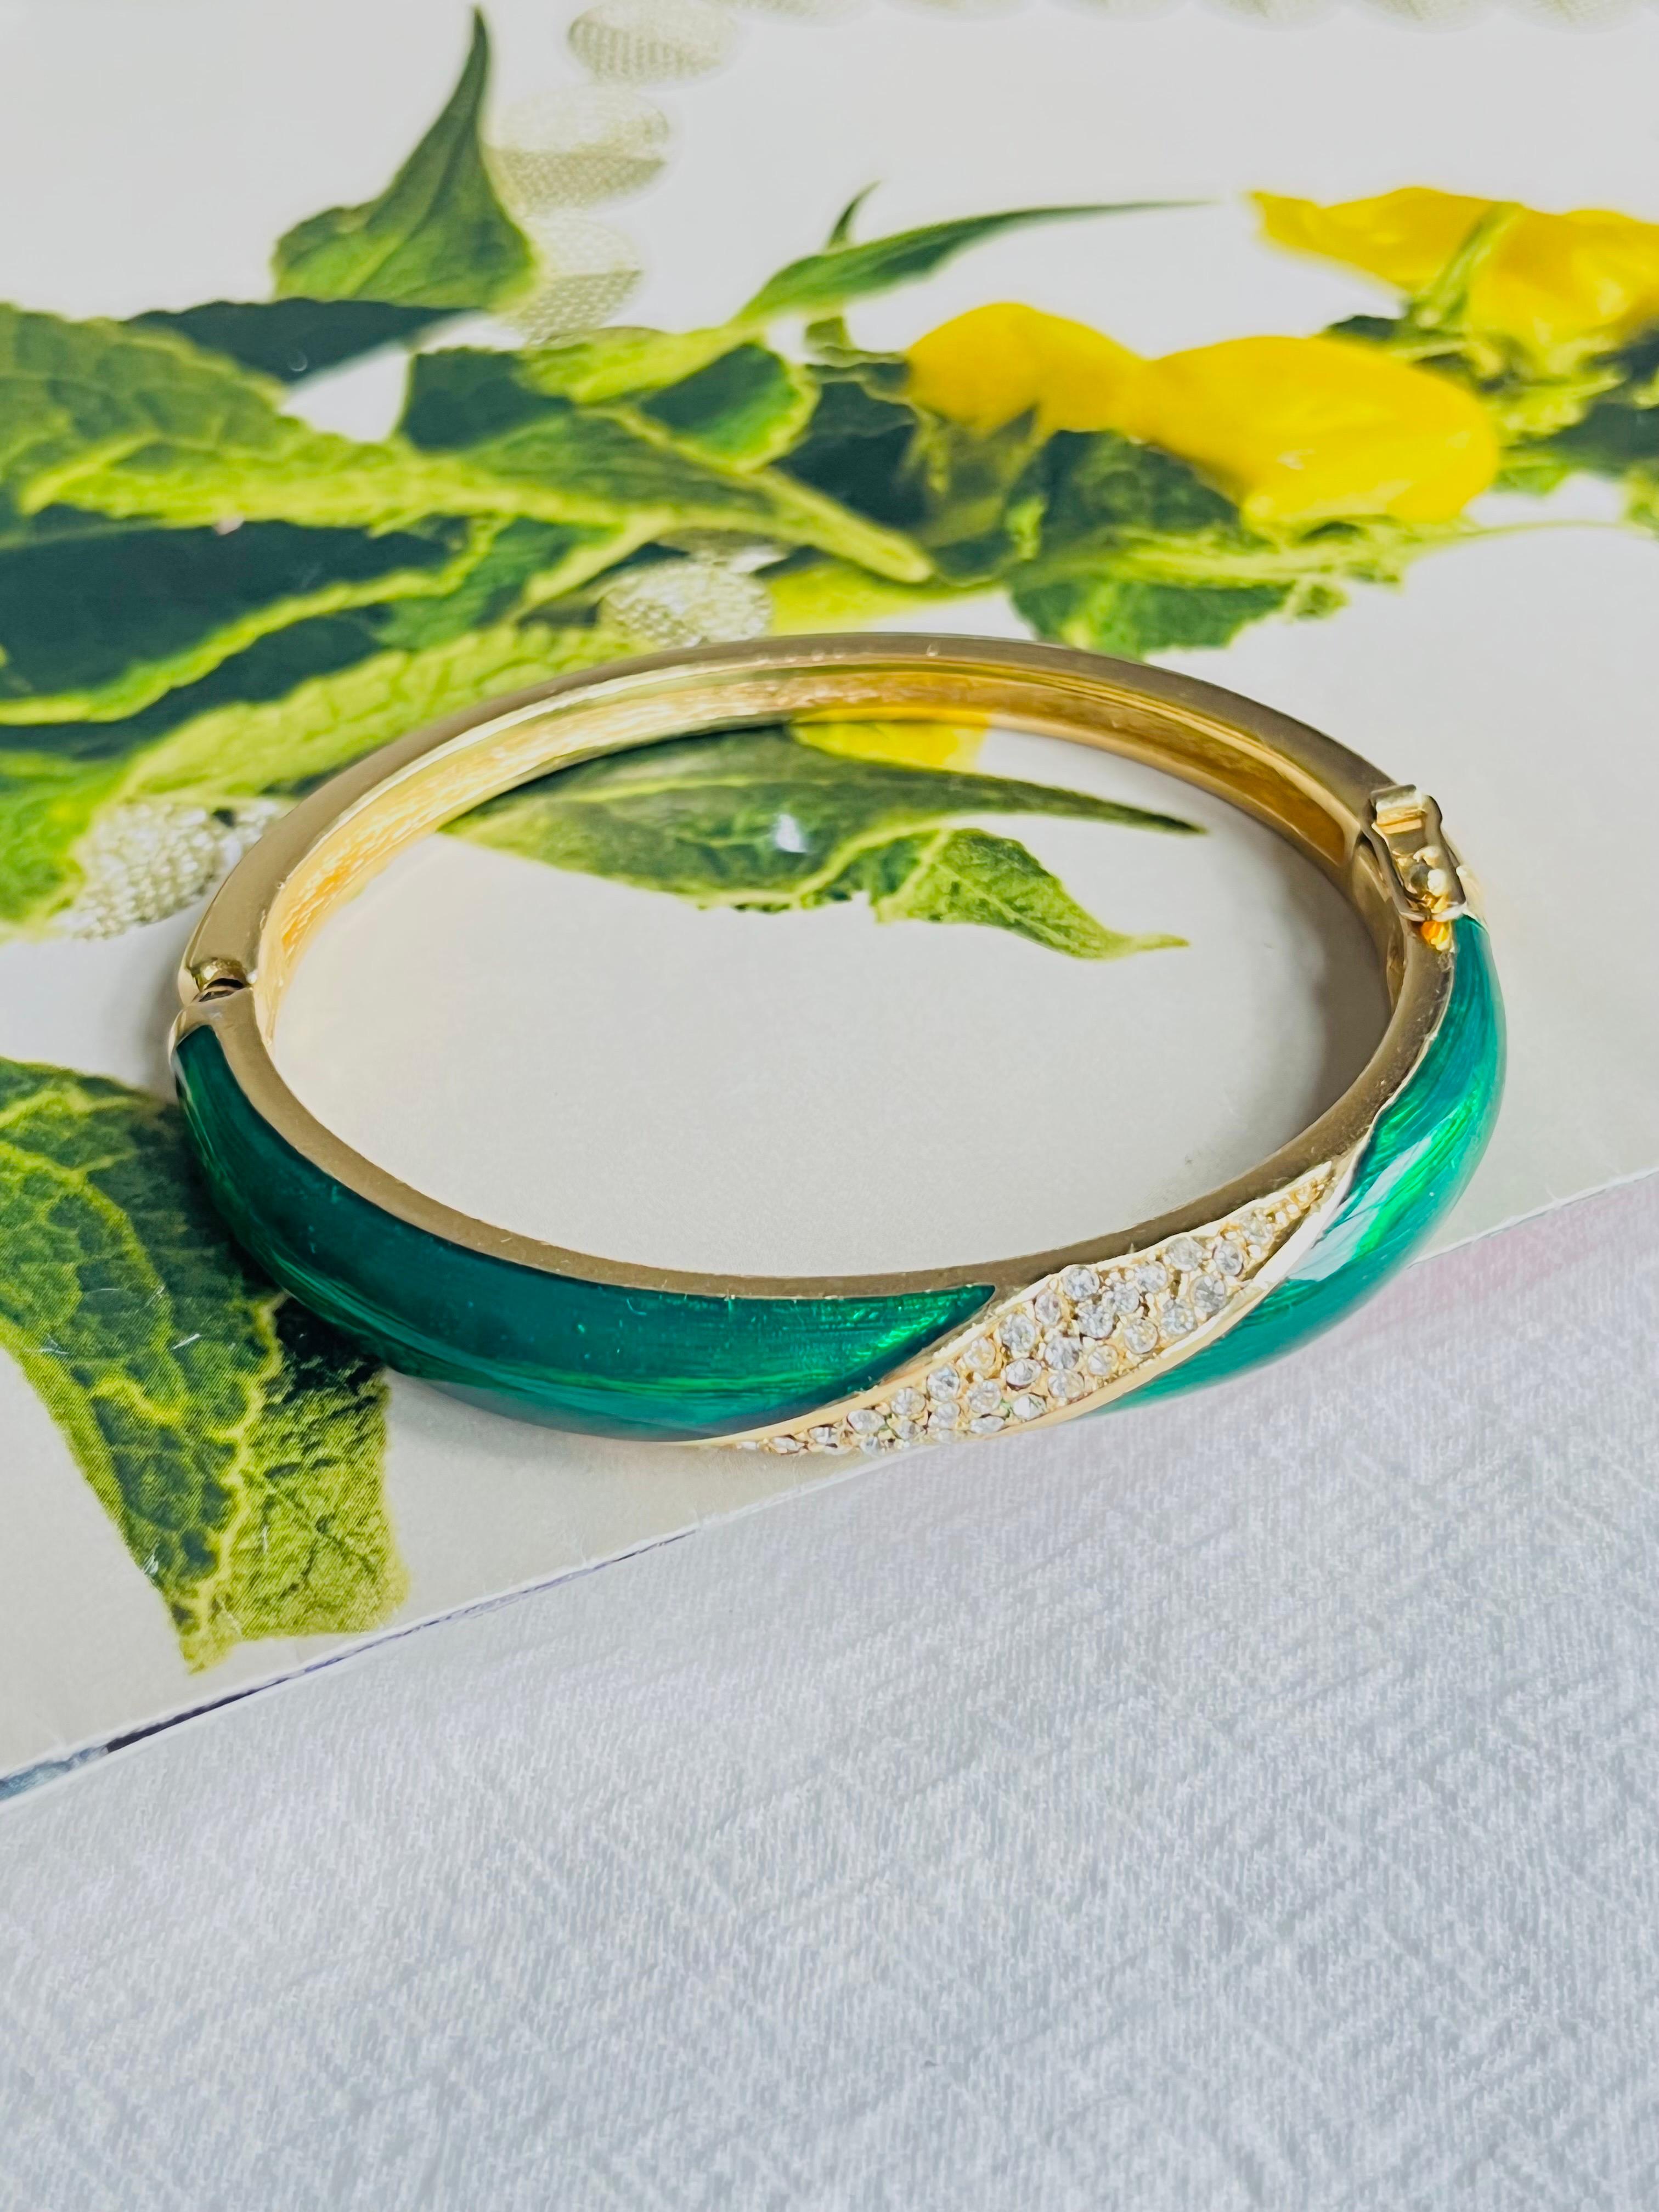 Christian Dior 1980s Vintage Emerald Green Enamel Crystals Cuff Bangle Bracelet, Gold Tone

A very beautiful bracelet by Chr. DIOR, signed at the back. Rare to find. 

Very good condition. 100% Genuine.

Material: Gold plated metal, Rhinestones,